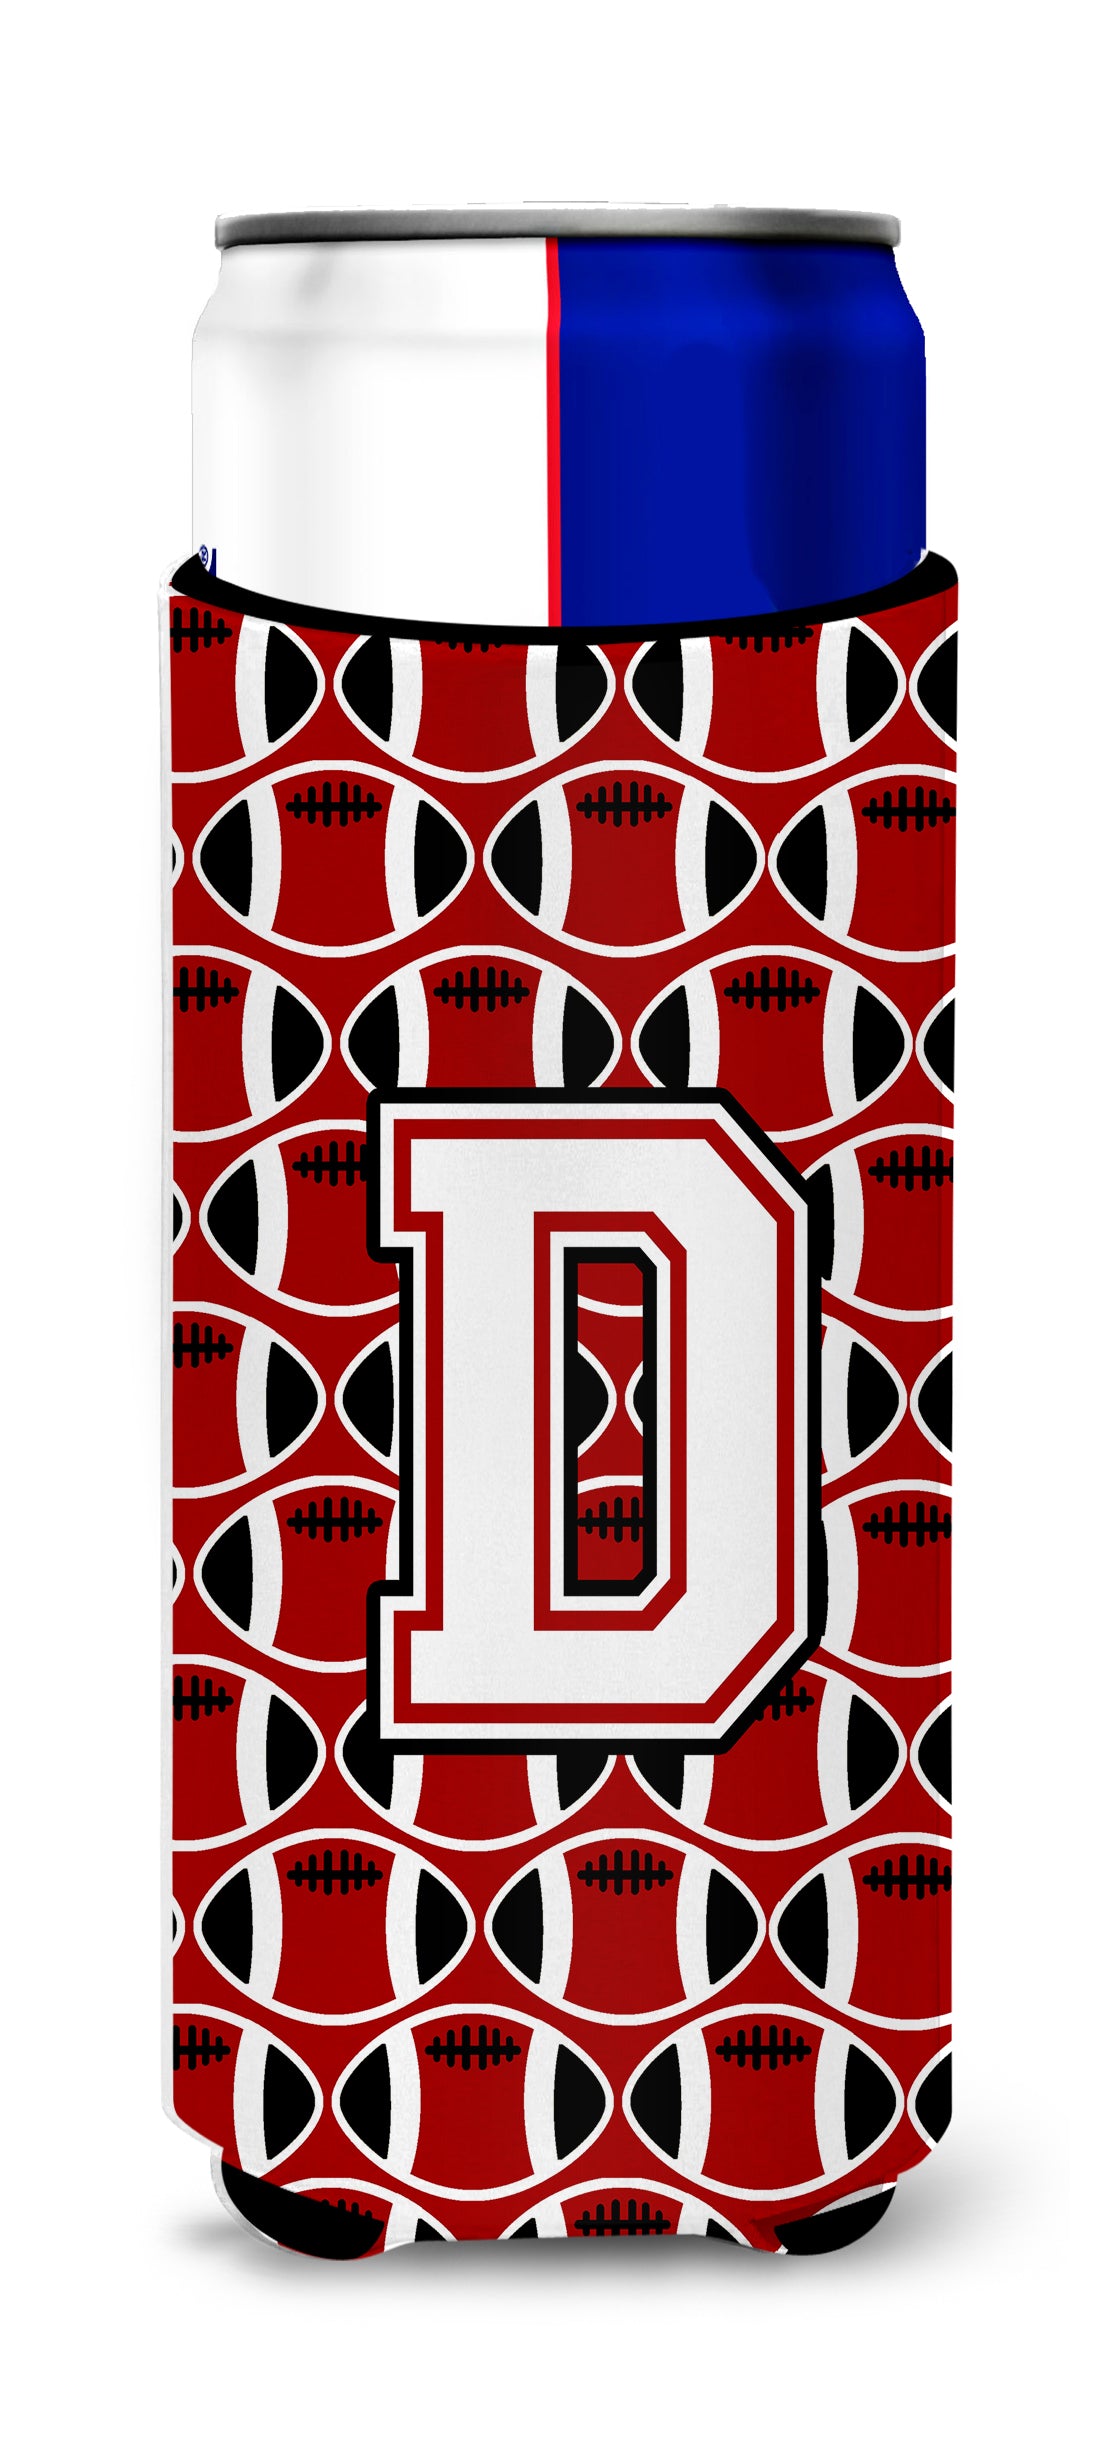 Letter D Football Cardinal and White Ultra Beverage Insulators for slim cans CJ1082-DMUK.